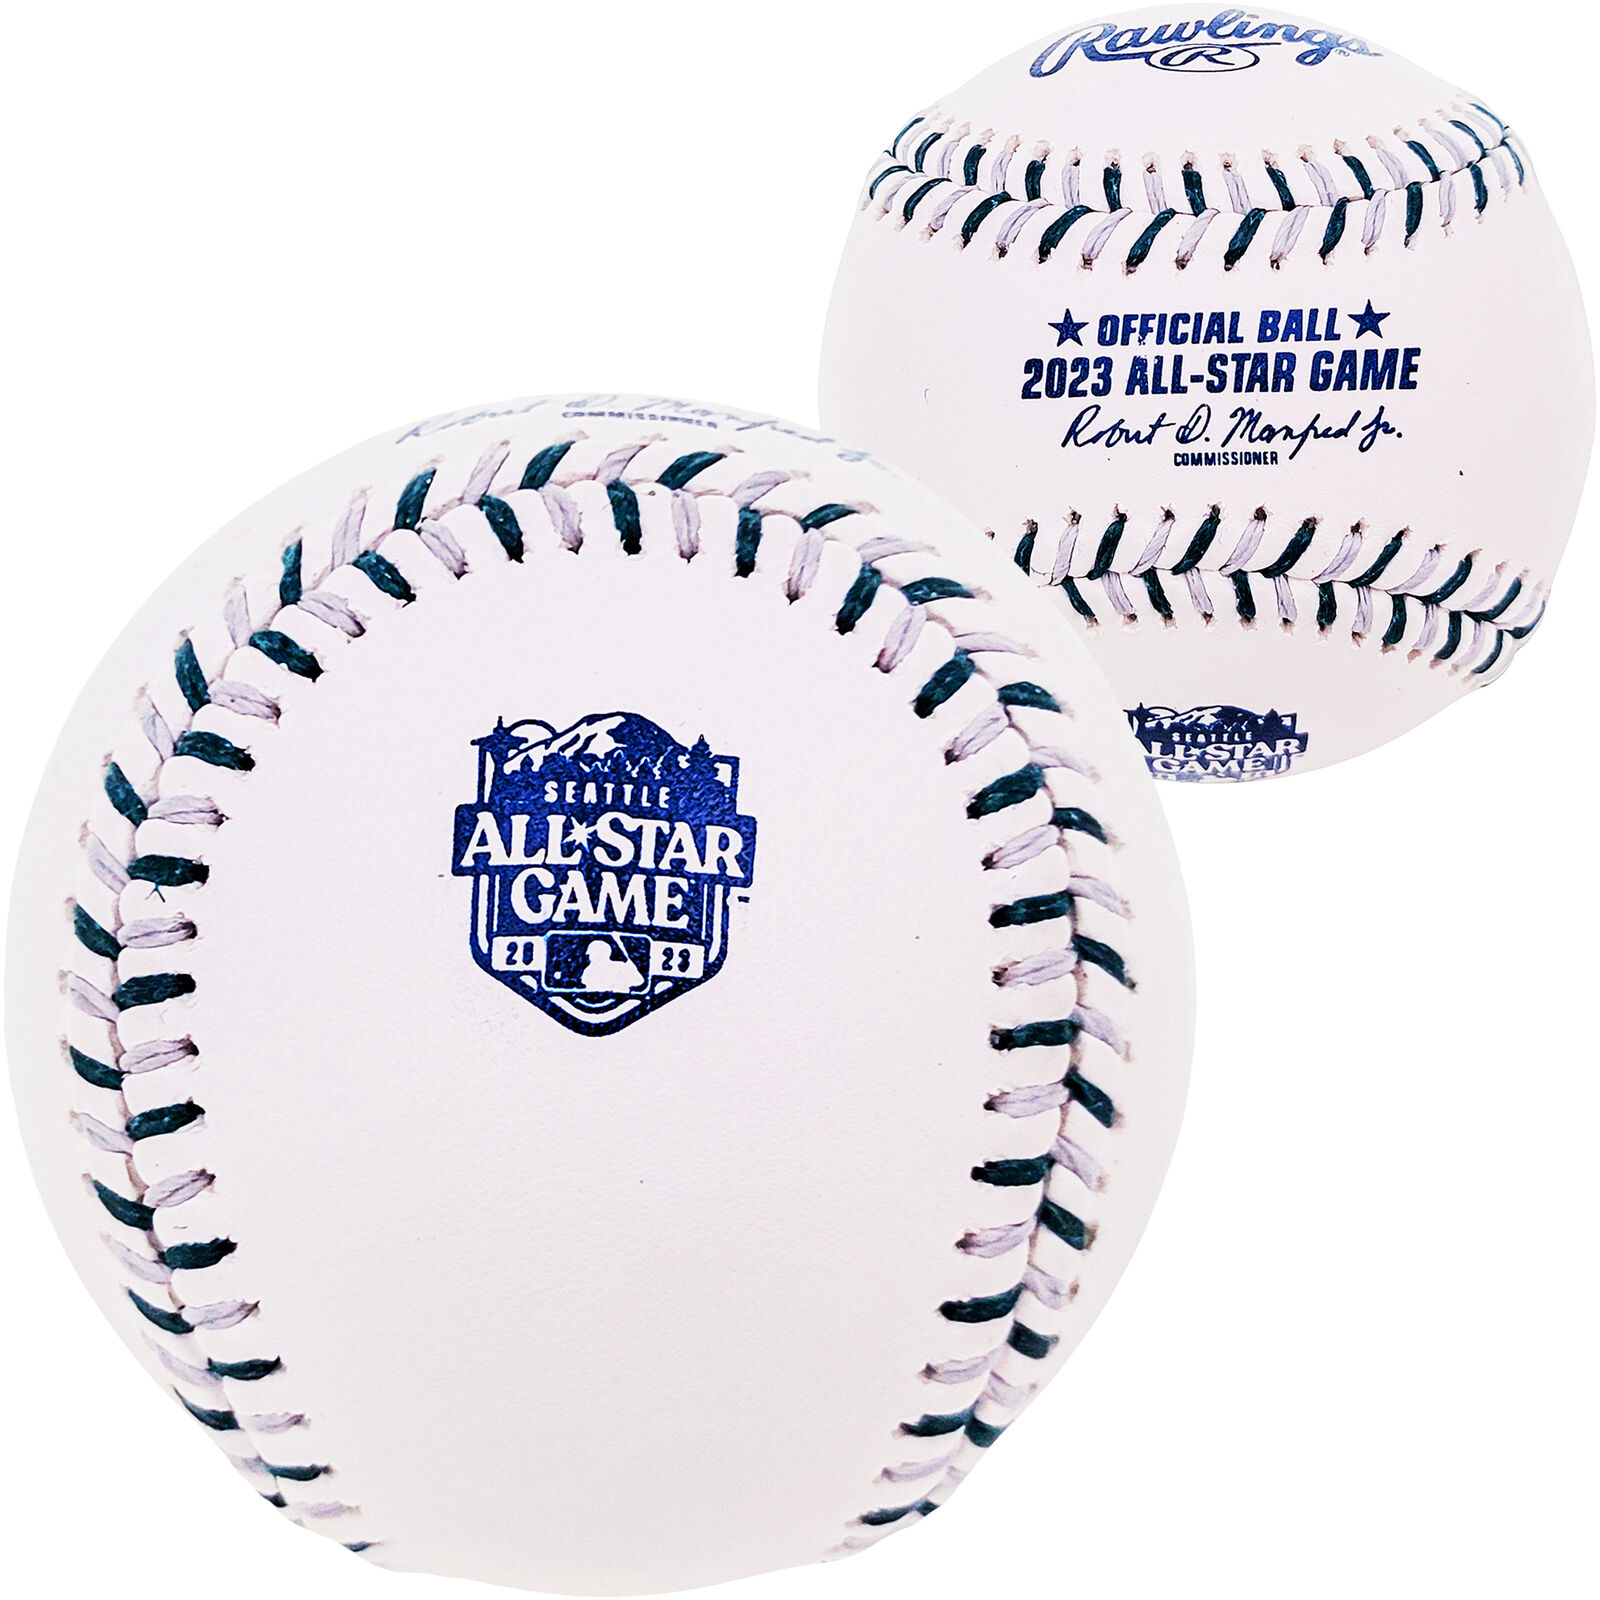 OFFICIAL 2023 ALL STAR GAME MLB BASEBALL UNSIGNED SEATTLE MARINERS STOCK #211031